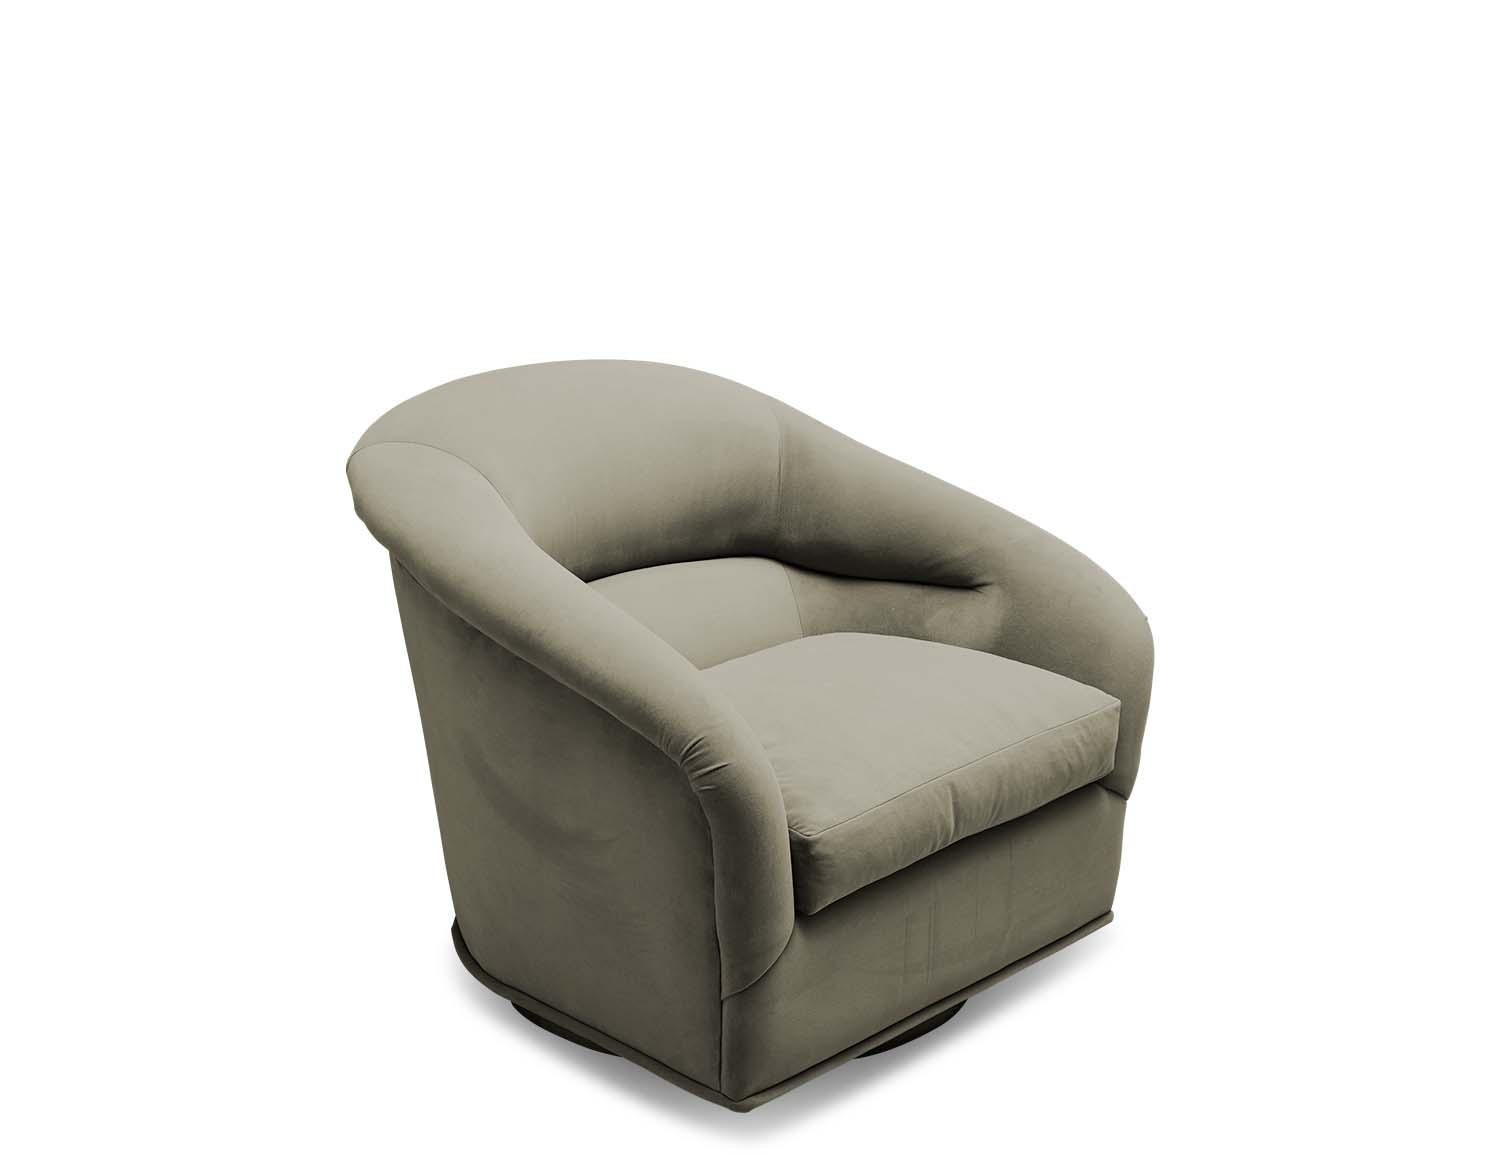 Brushed Velvet Huxley Swivel Chair and Ottoman by Lawson-Fenning